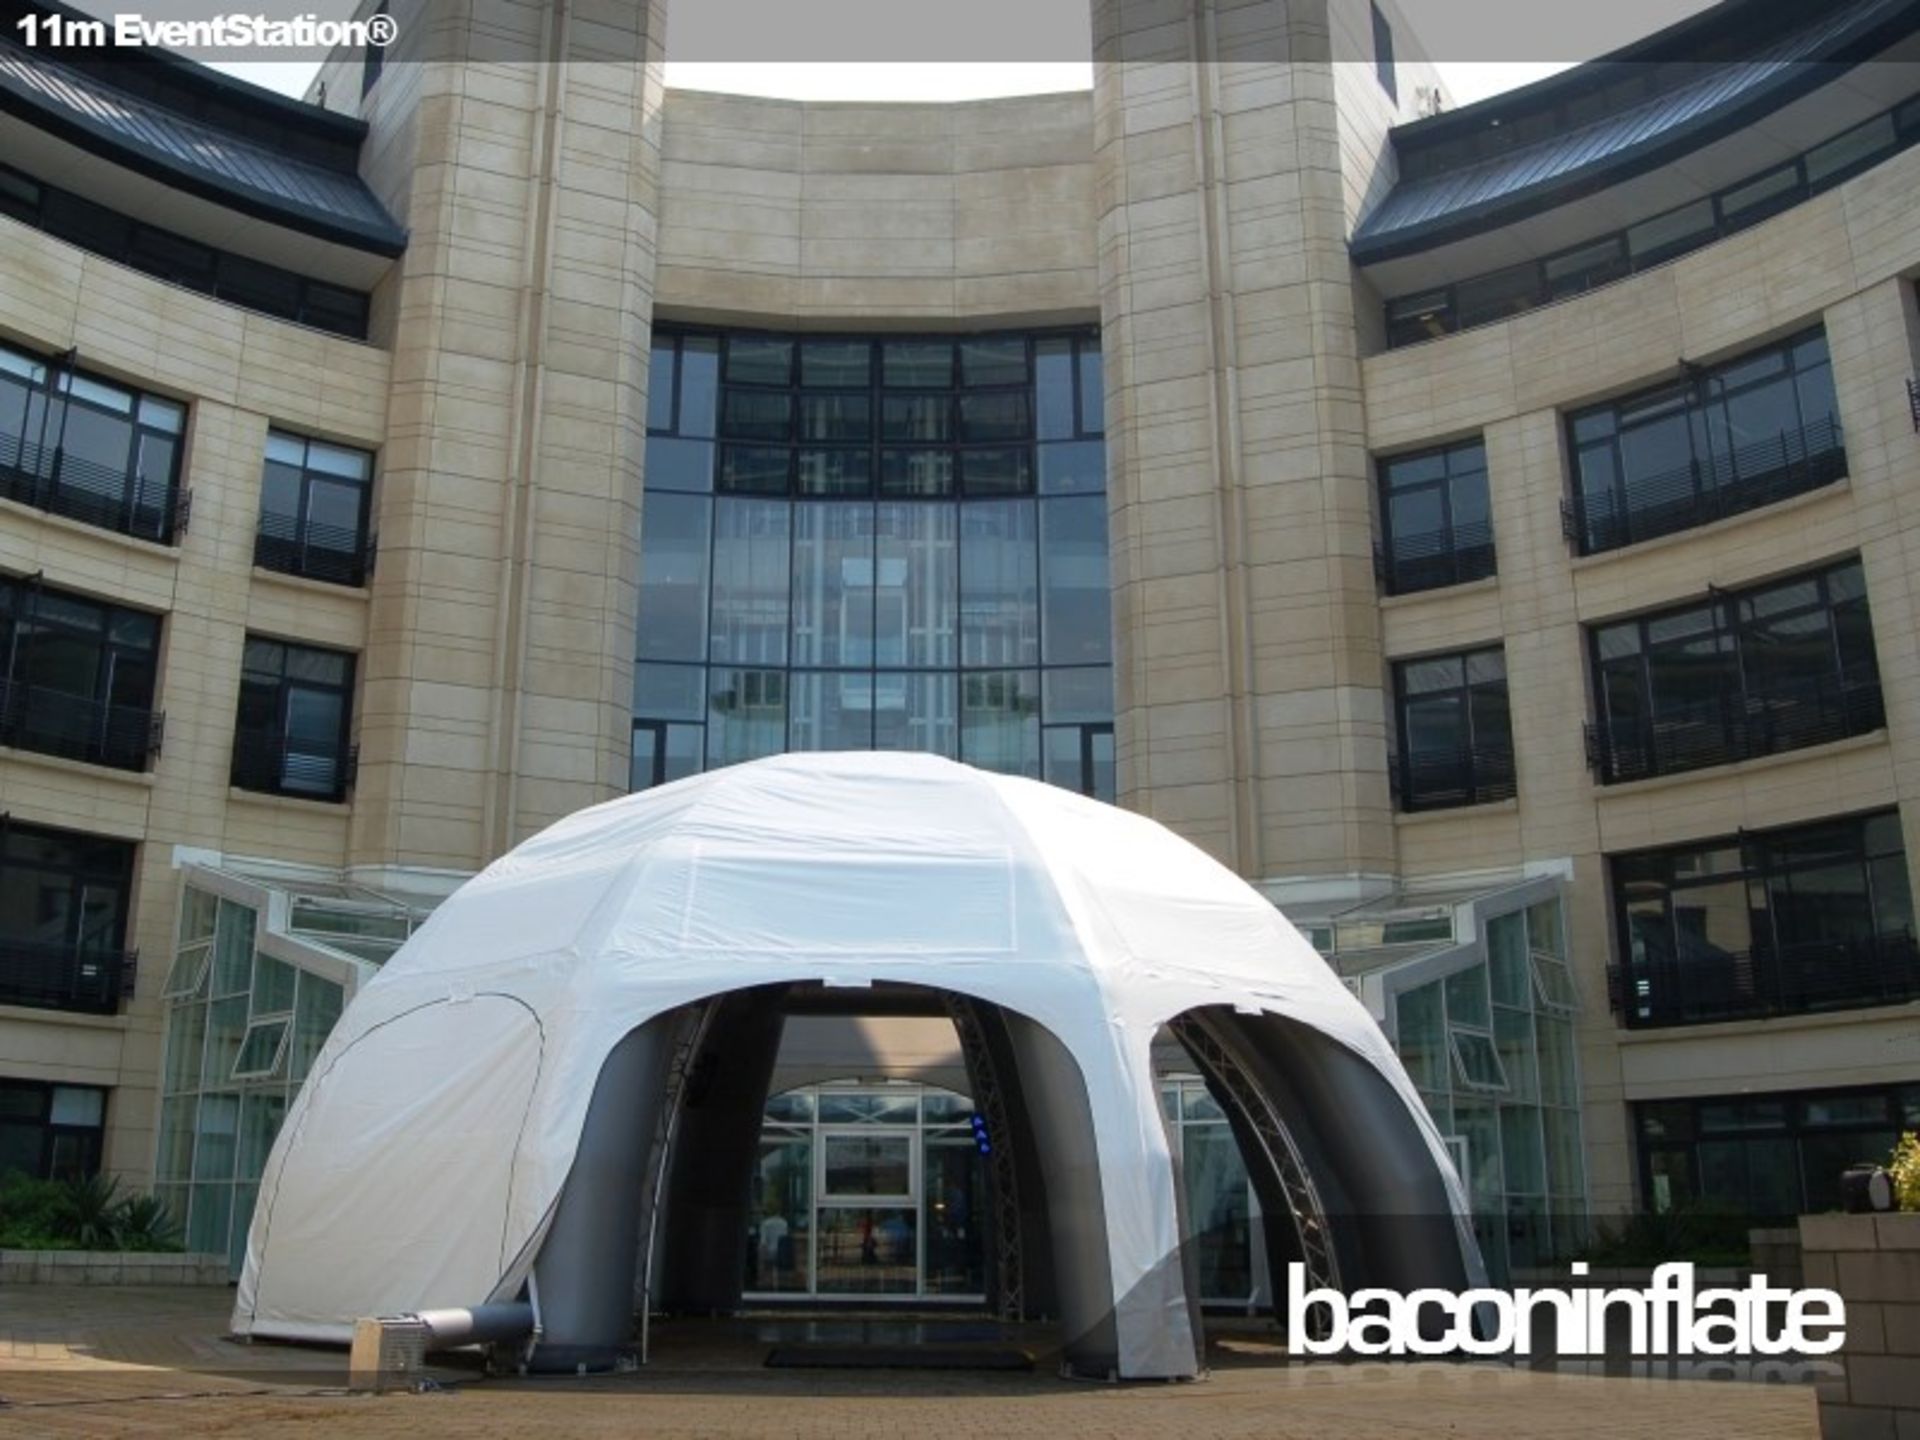 11m EventStation Leg Unit Inflatable Structure with Canopy (2 Bags) - CL573 - Location: Leicester